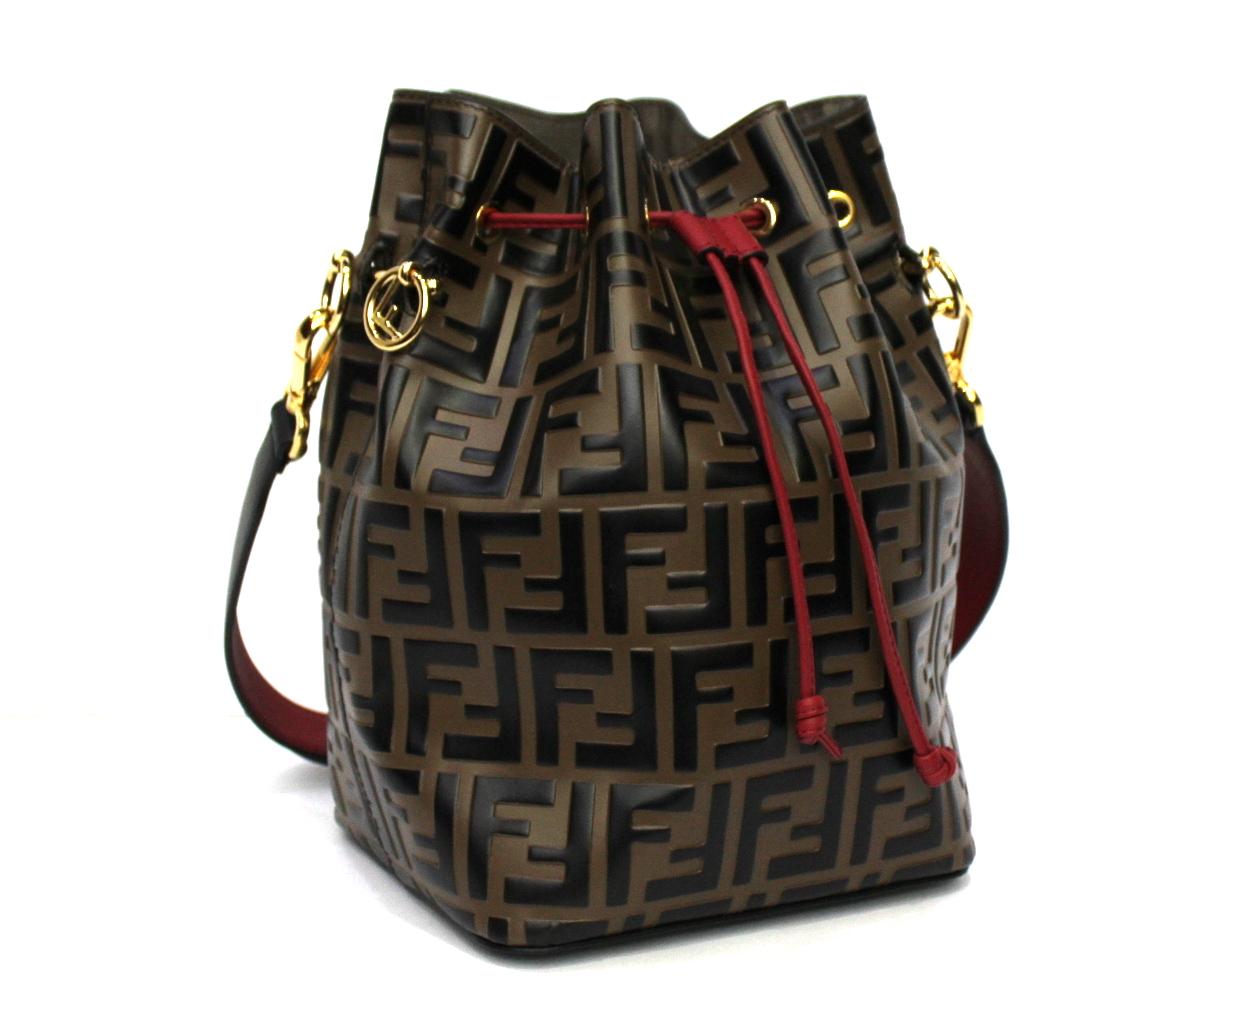 Fendi bucket made of brown leather with red details.
Closure with lace, internally very large. Equipped with a removable leather shoulder strap. The bag is in excellent condition.